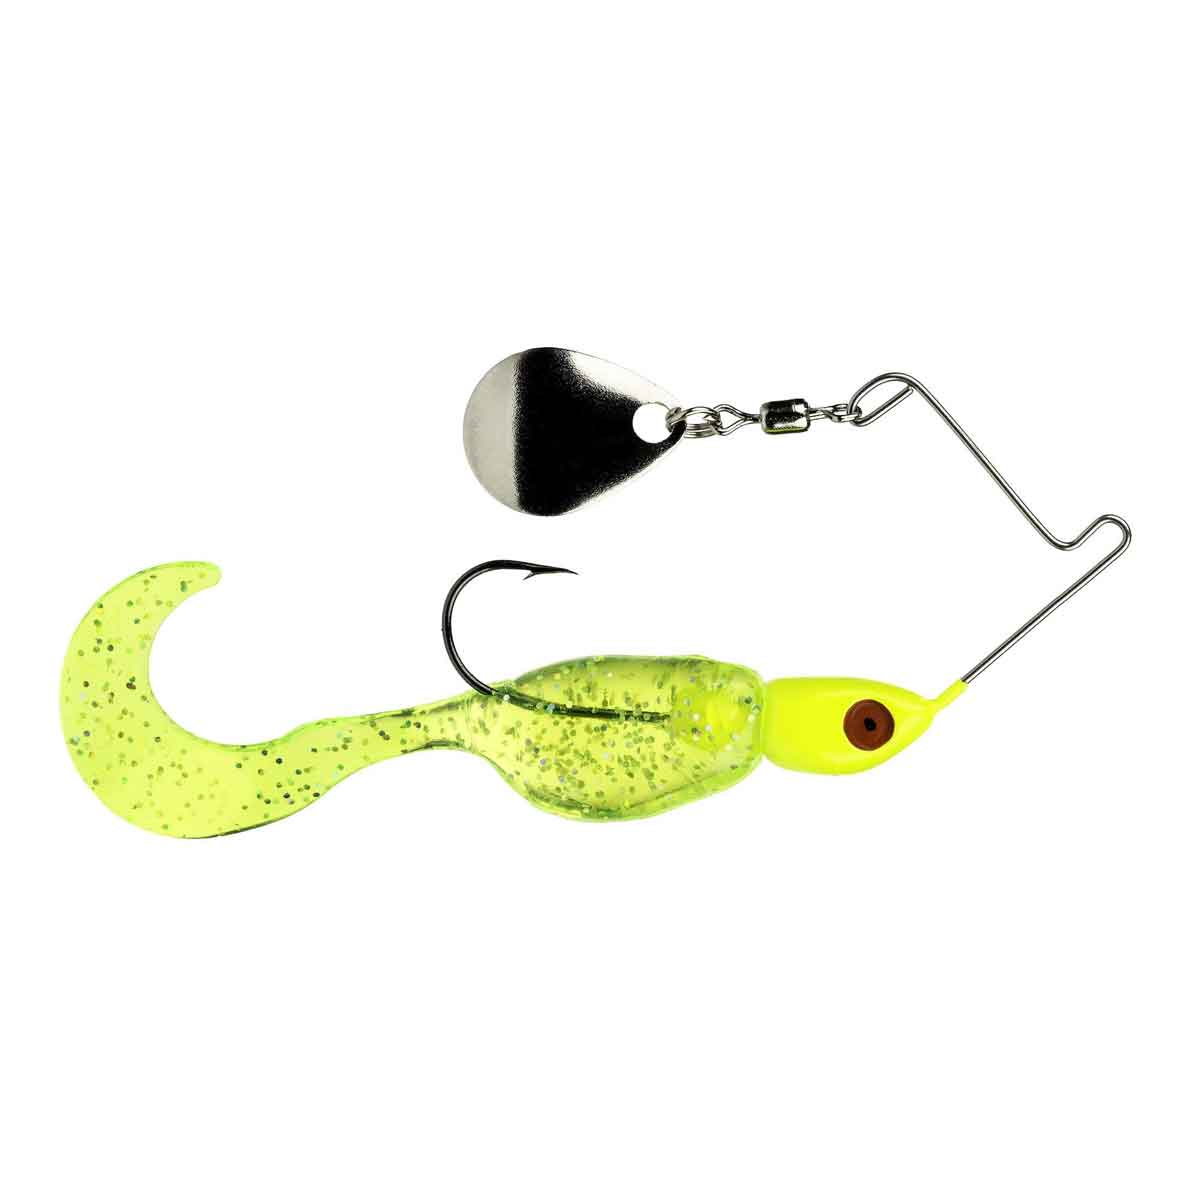 Mr. Crappie Spin Baby Spinnerbait_Chartreuse Shiner